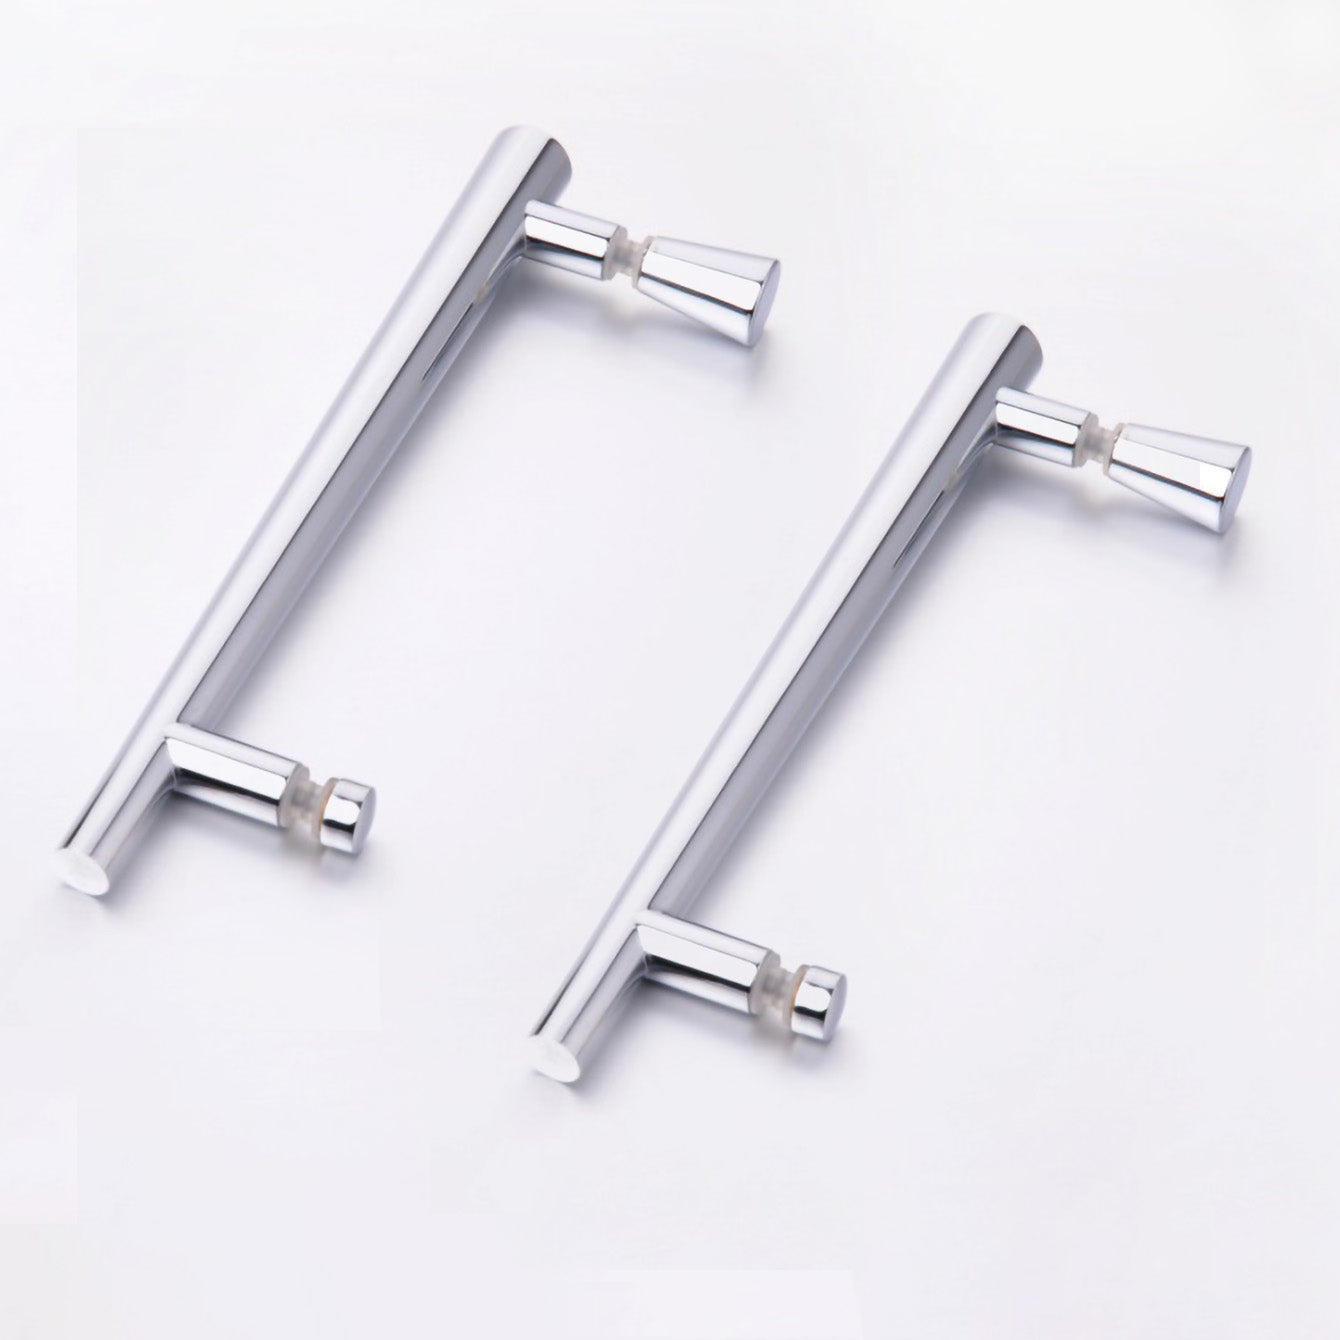 Olney Rounded Stainless Steel 200 mm Shower Door Handle Set